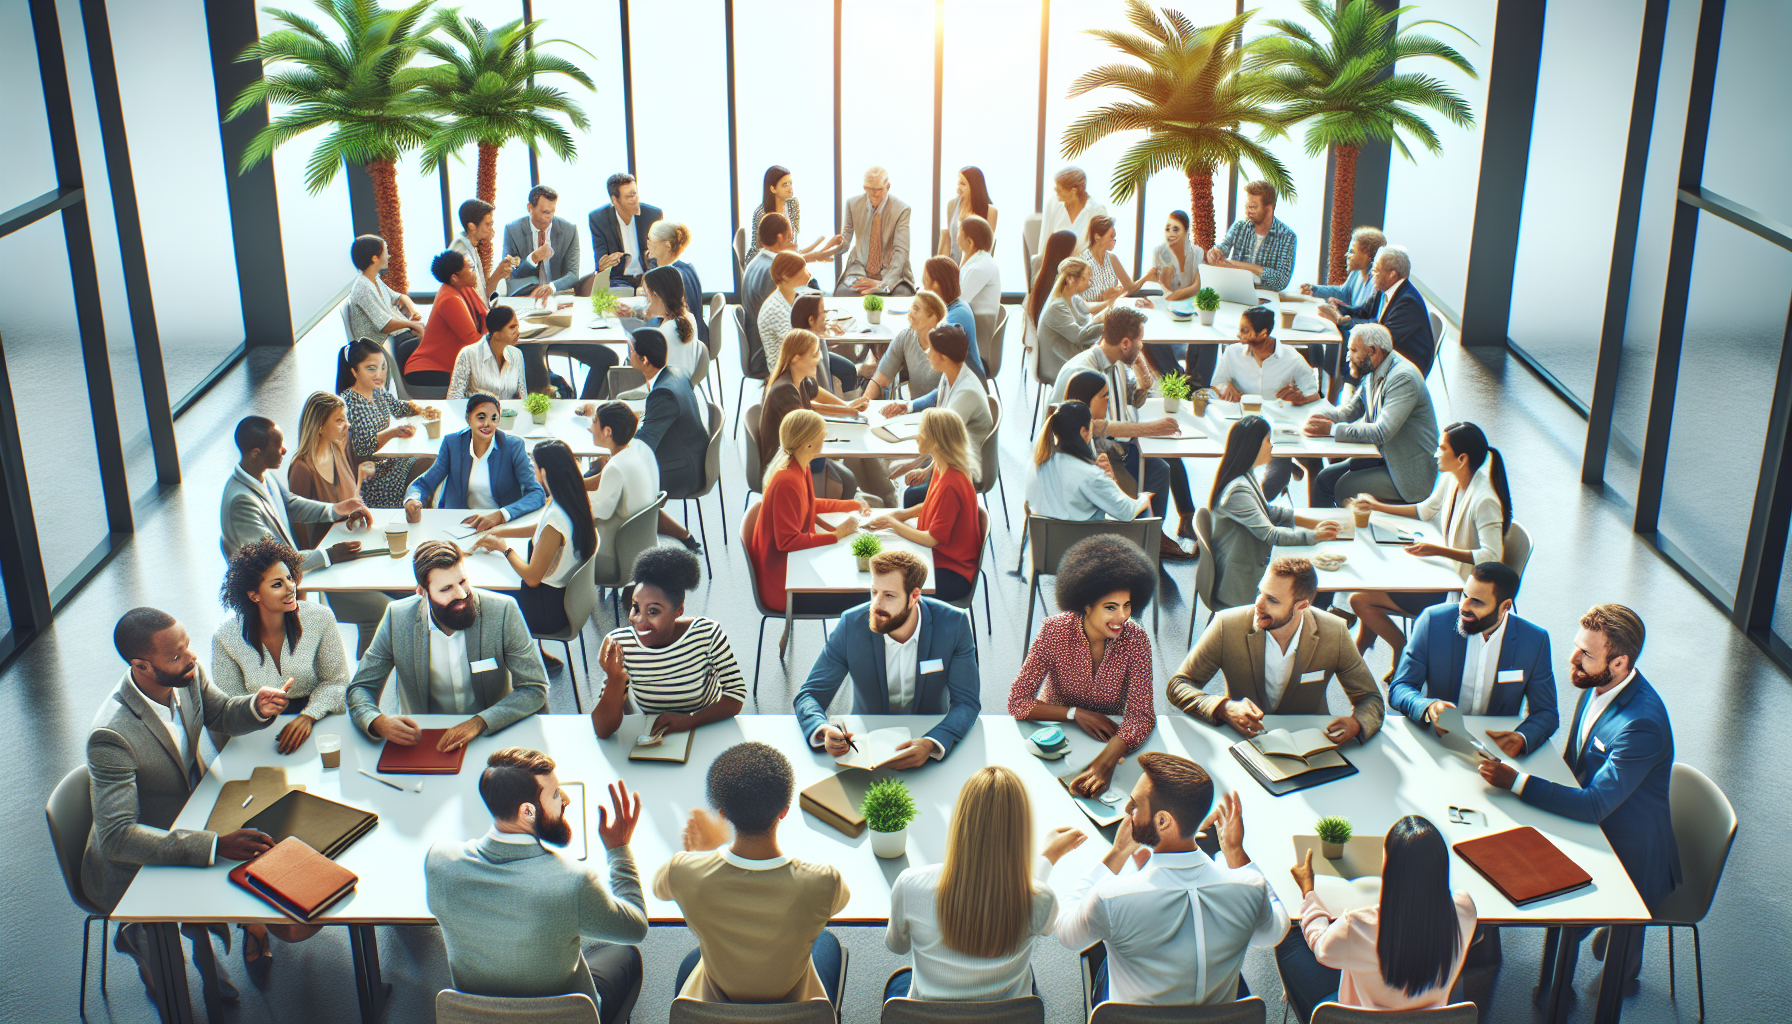 Illustration of diverse entrepreneurs and investors networking at a conference